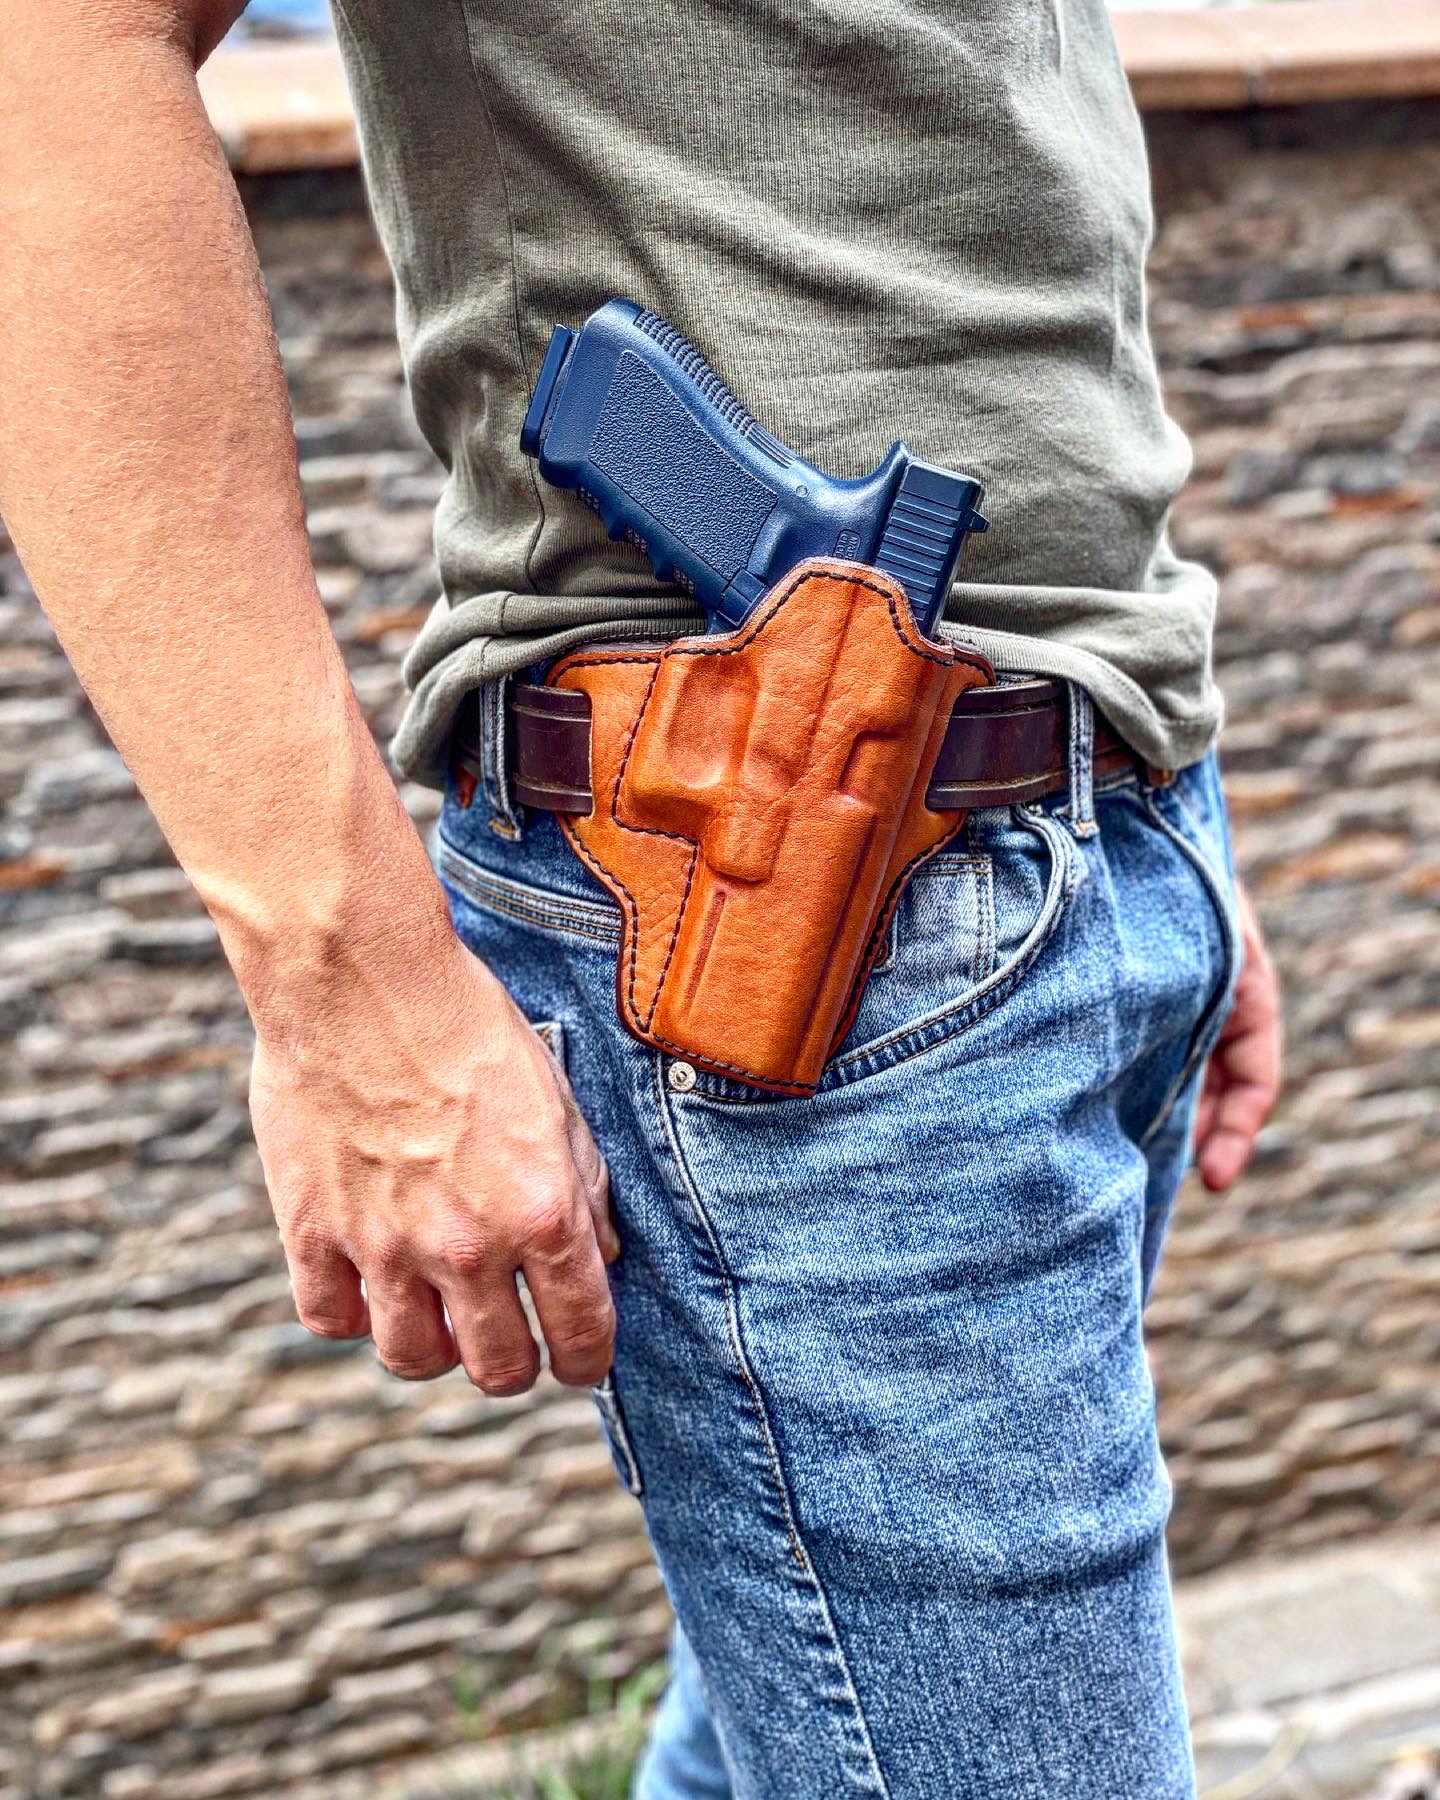 Hurricane Belt Holster – Patch Man's Leather